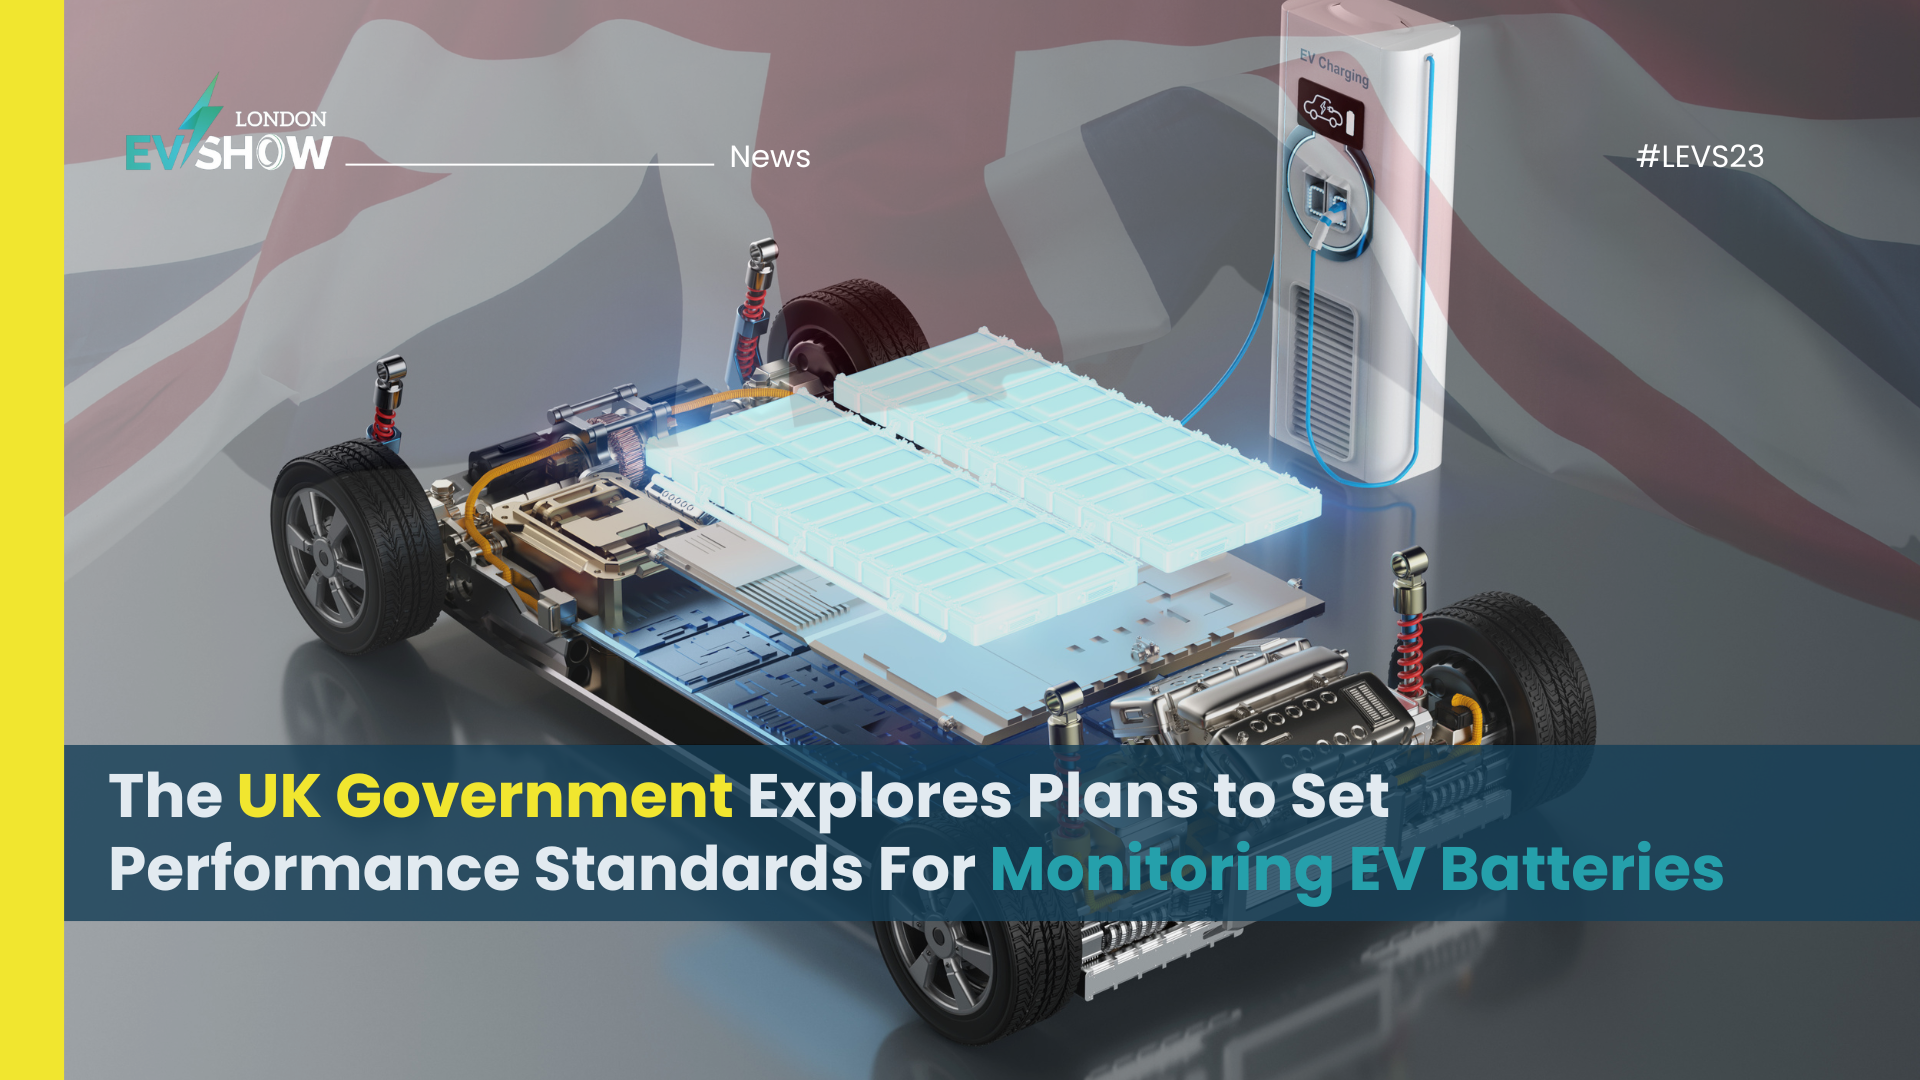 The UK Government Explores Plans to Set Performance Standards For Monitoring EV Batteries